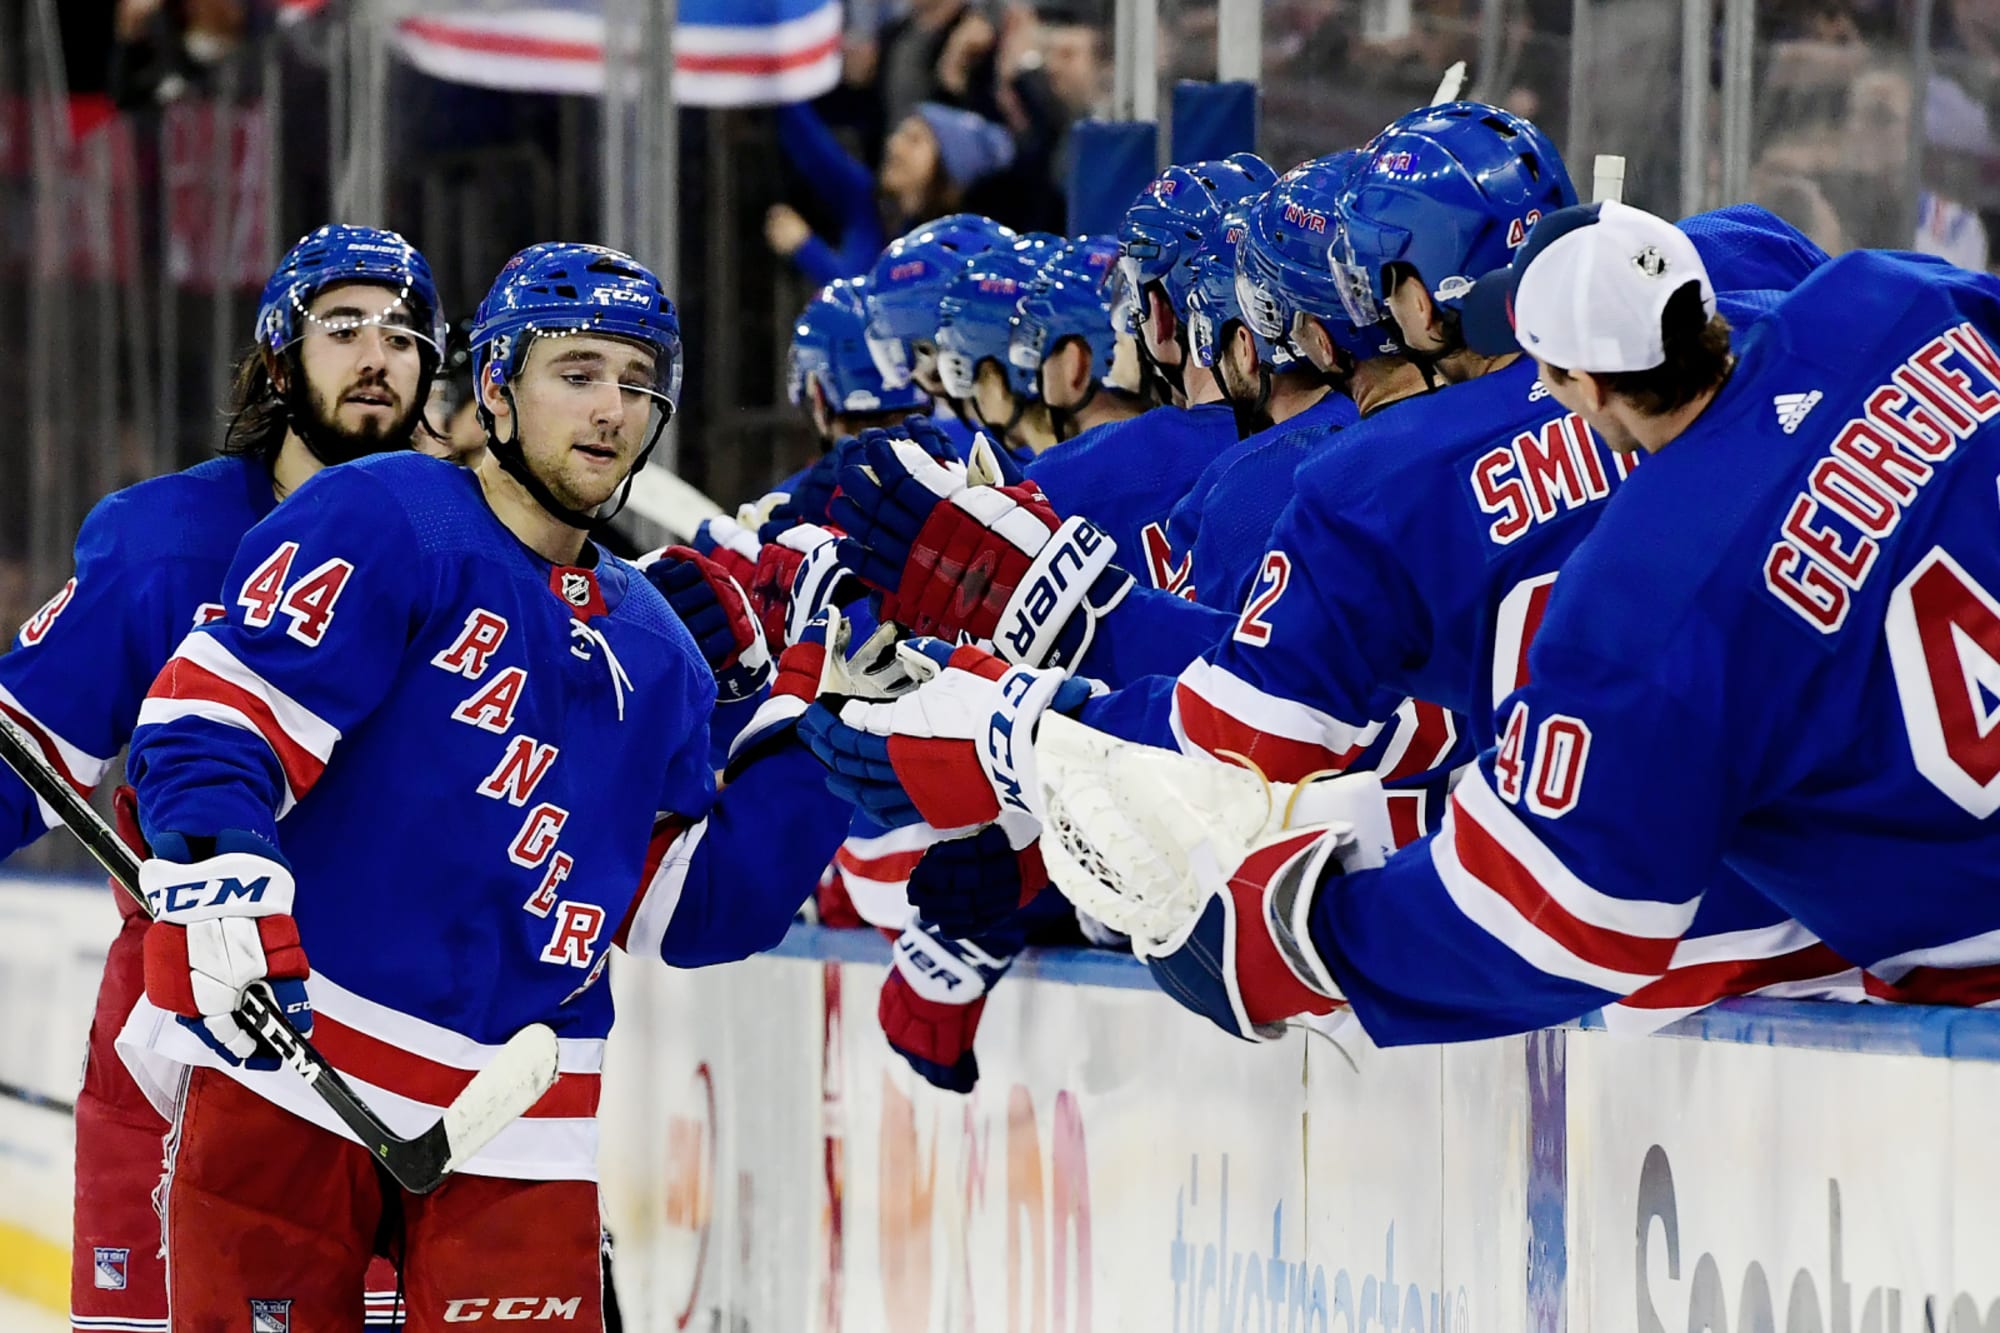 New York Rangers: The cap space situation